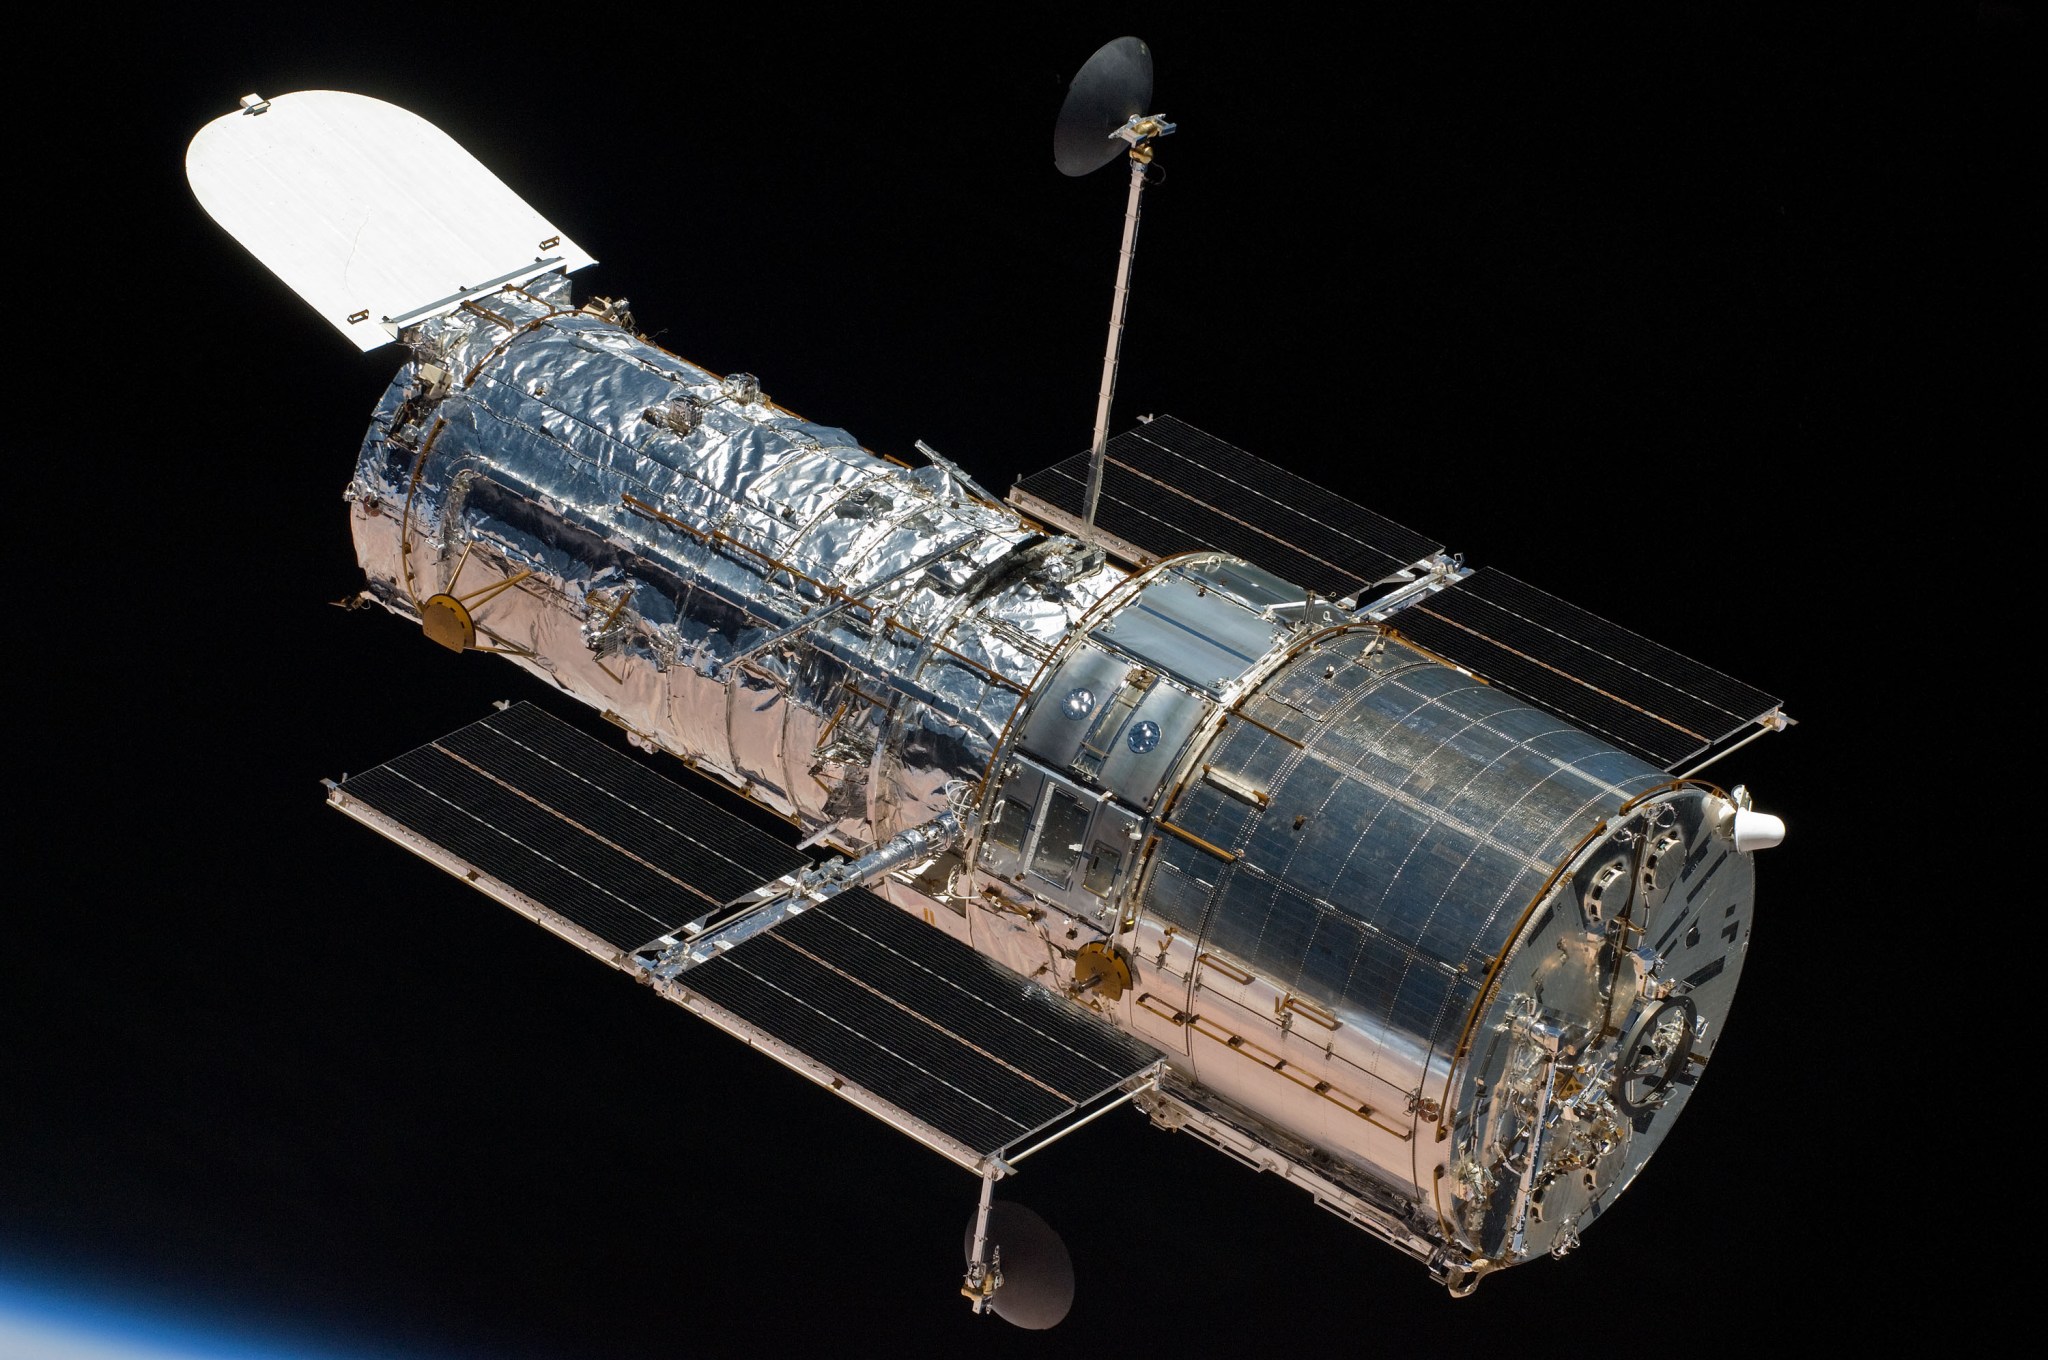 image of Hubble Space Telescope in space